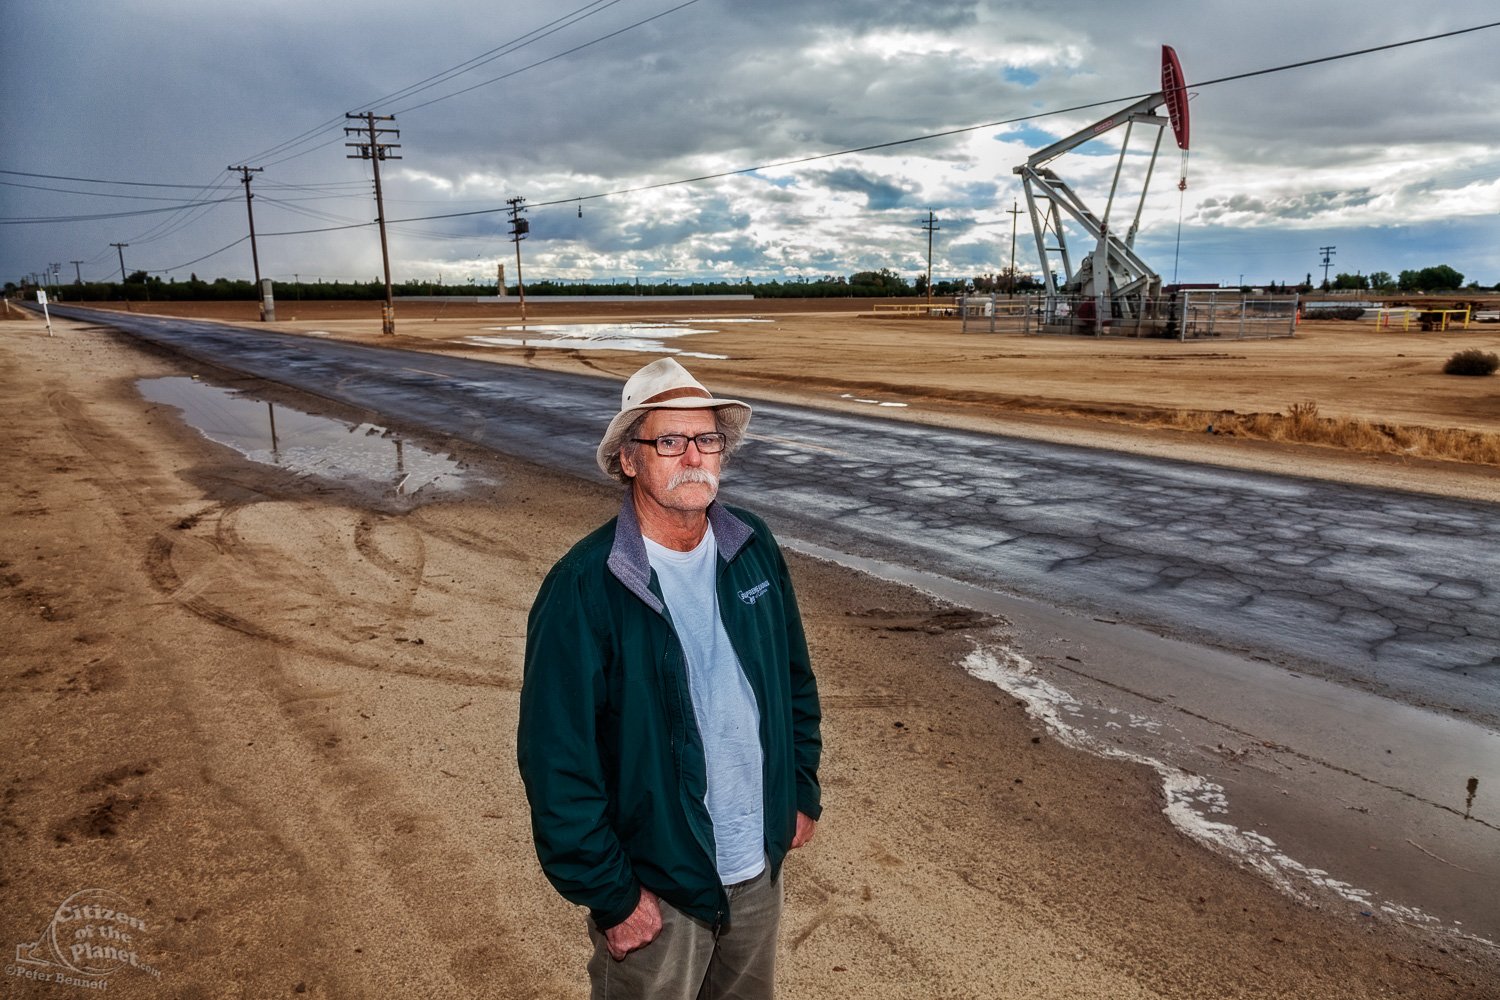  Tom Frantz is a fourth generation farmer and an air quality and anti-fracking activist who acts as a watchdog over the local oil and gas industry activities. Shafter, Kern County. 